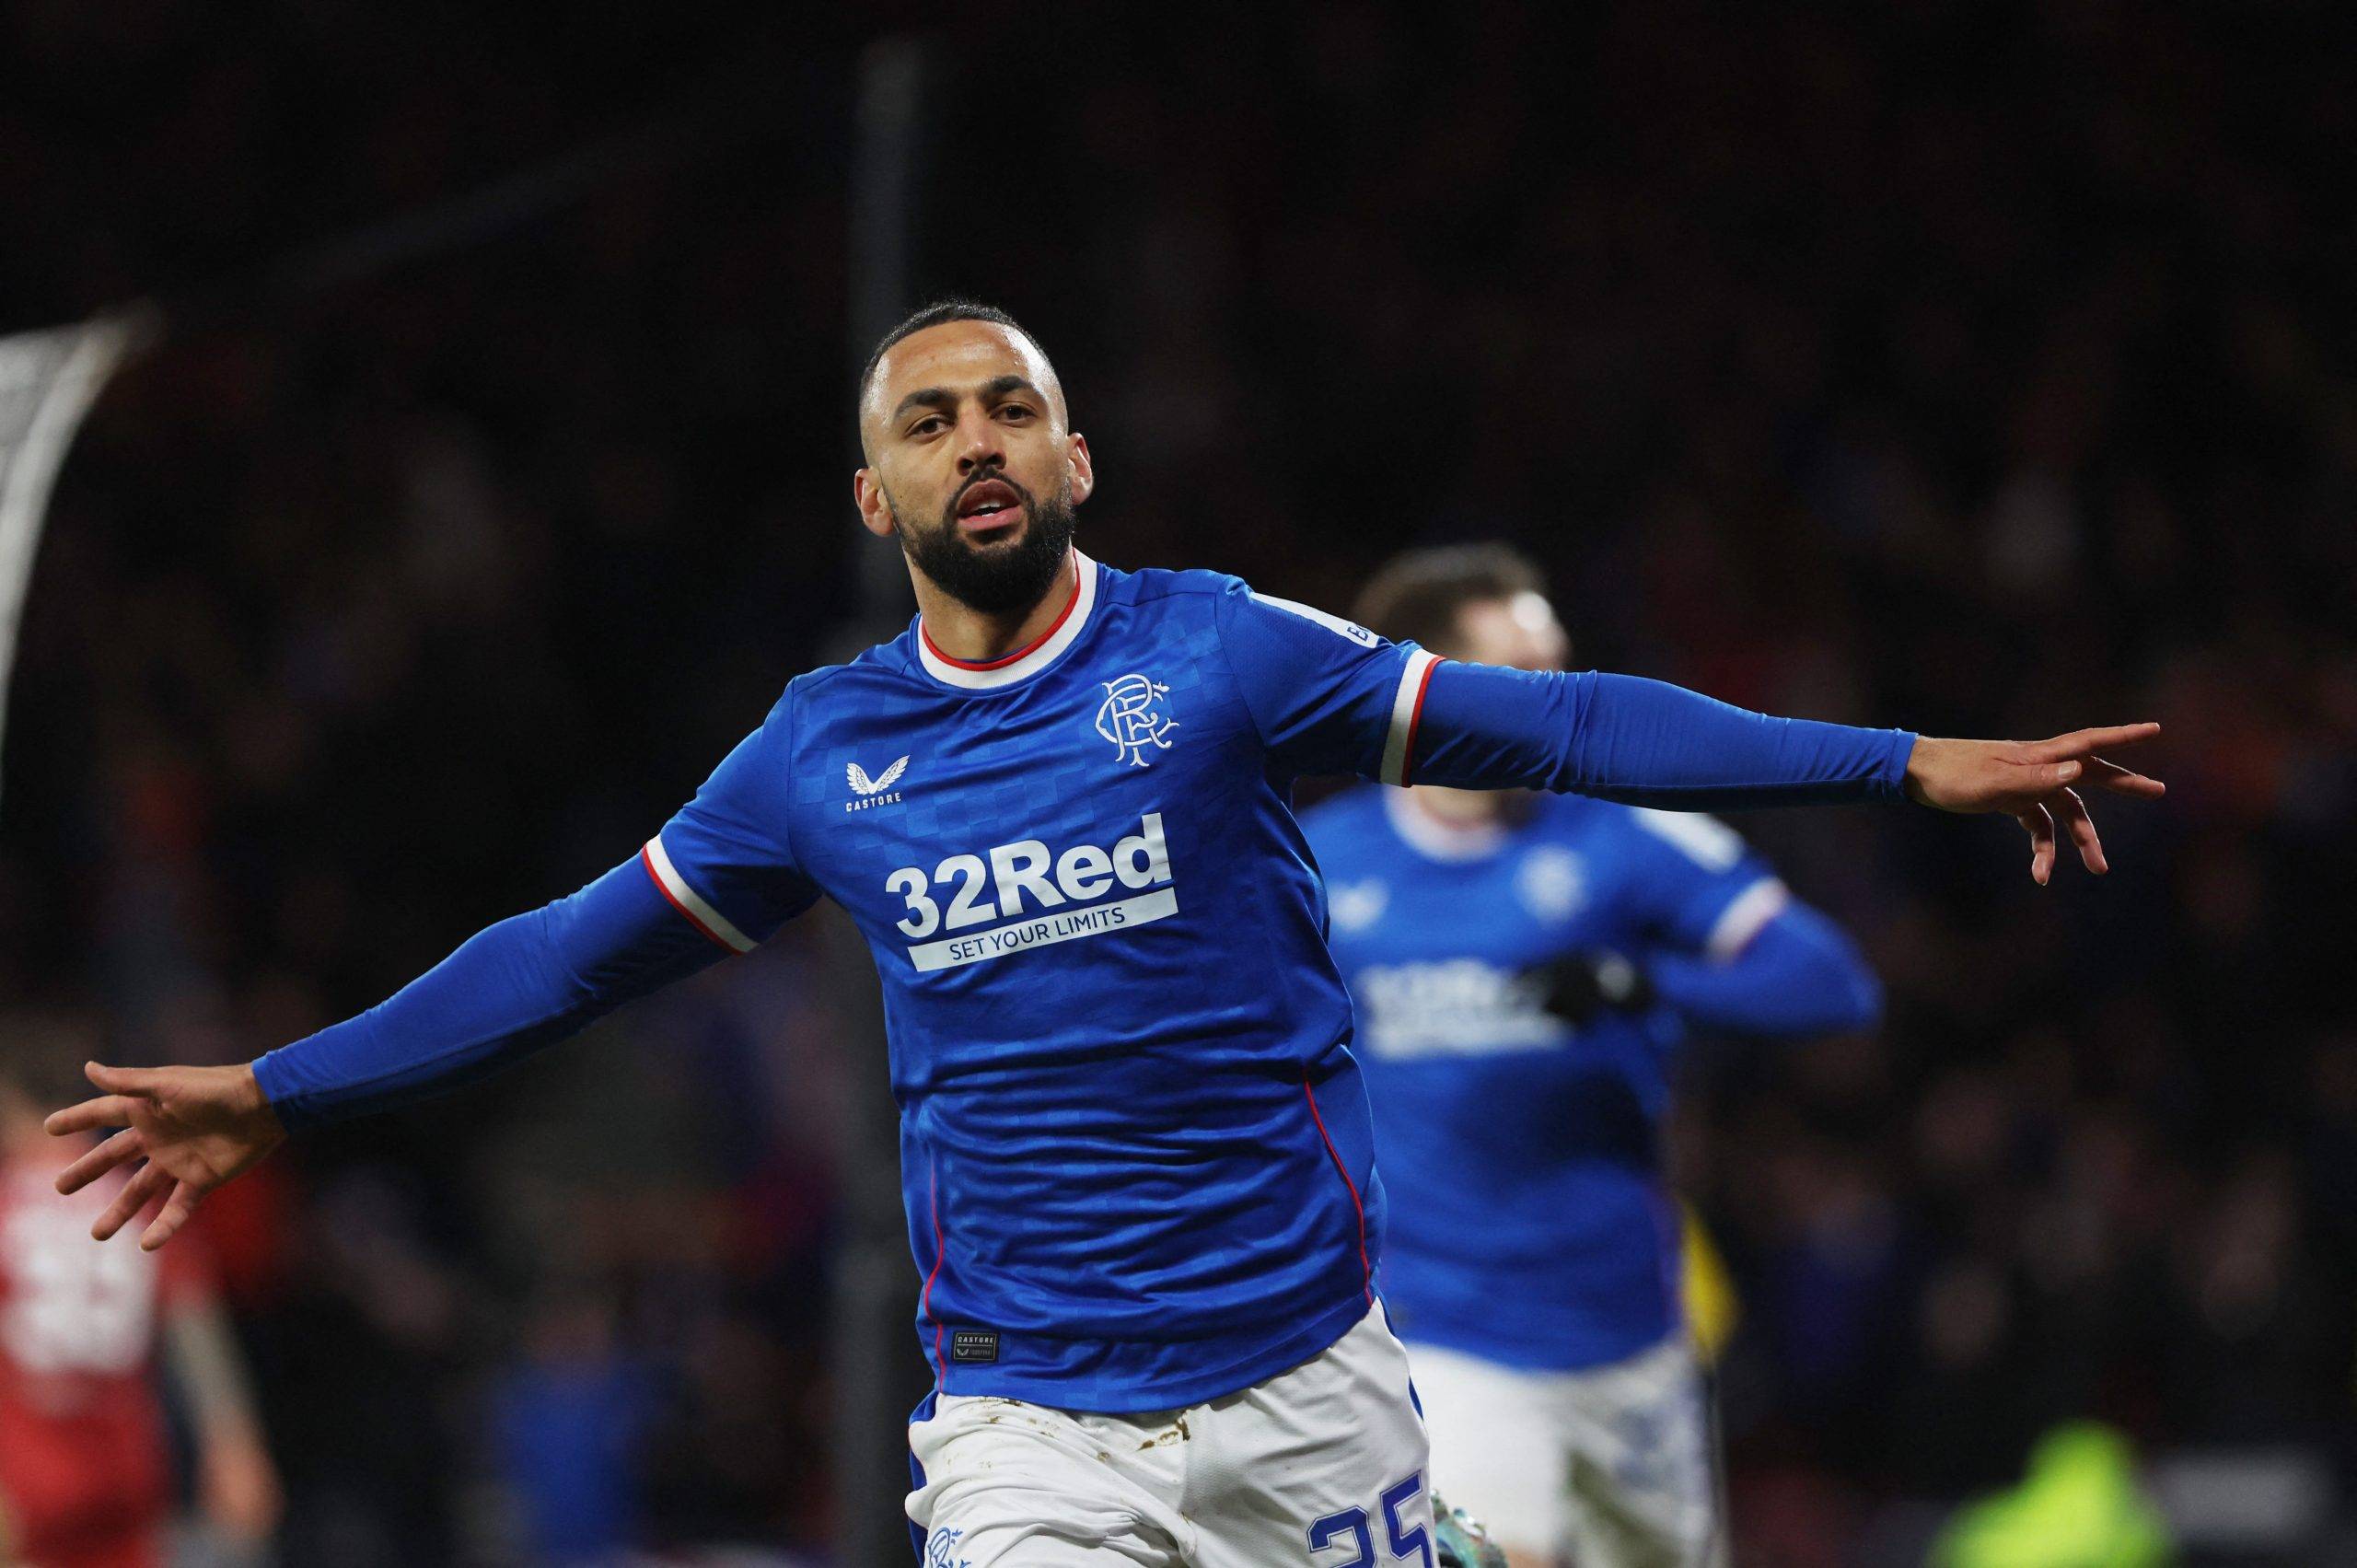 Rangers: Kemar Roofe may not be offered a contract extension - Podcasts